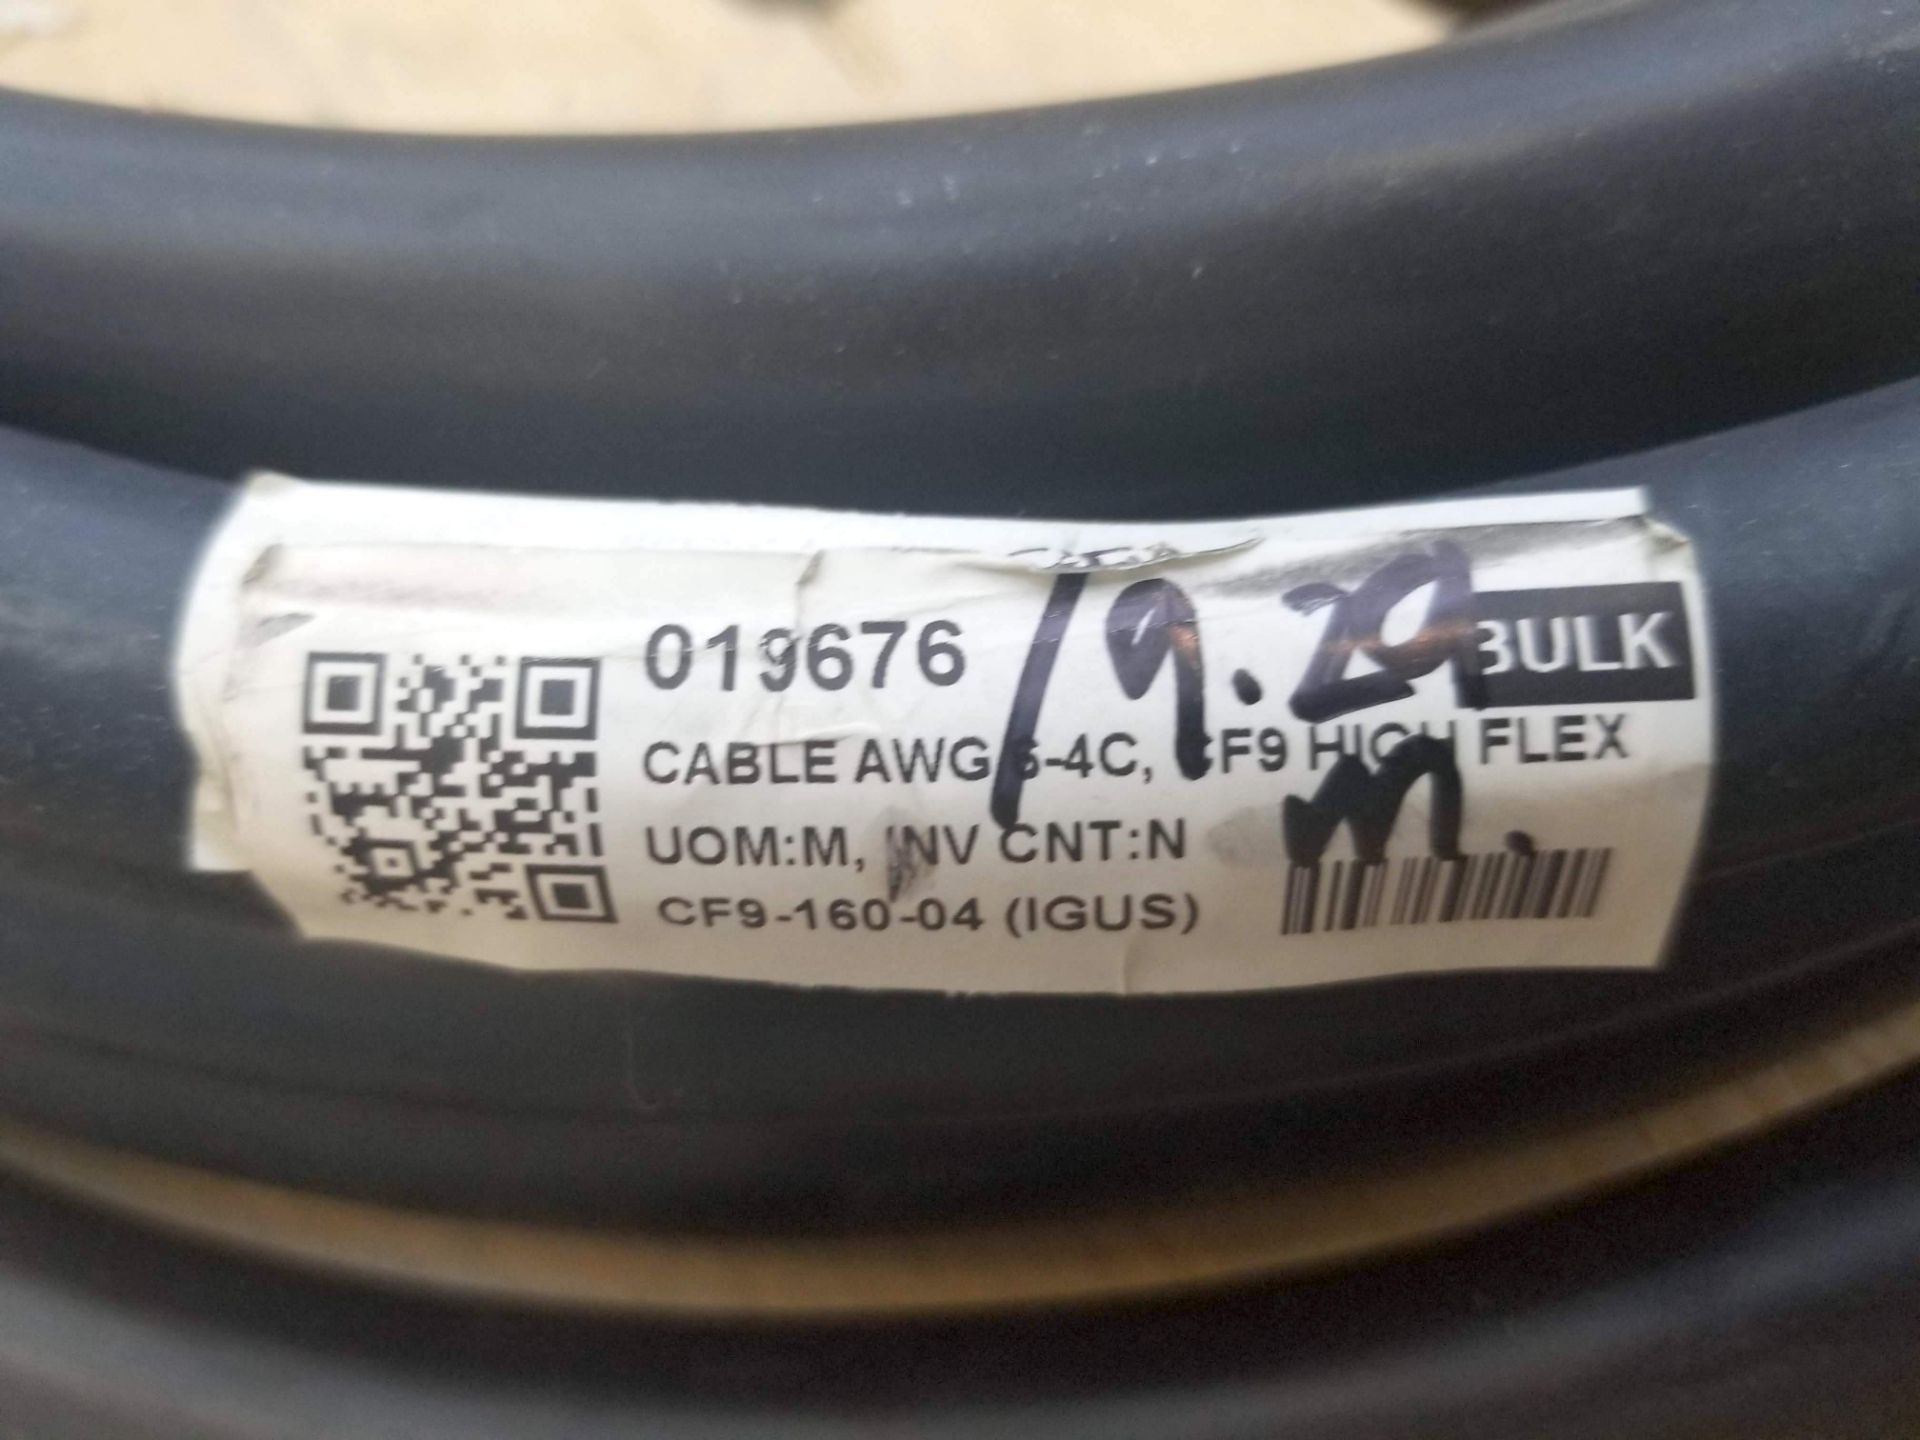 LOT - CABLE AWG 6-4C, CF9 HIGH FLEX, WIRE DLO -1/0 AWG -BLACK, WIRE DLO -1 AWG -BLACK - Image 2 of 5